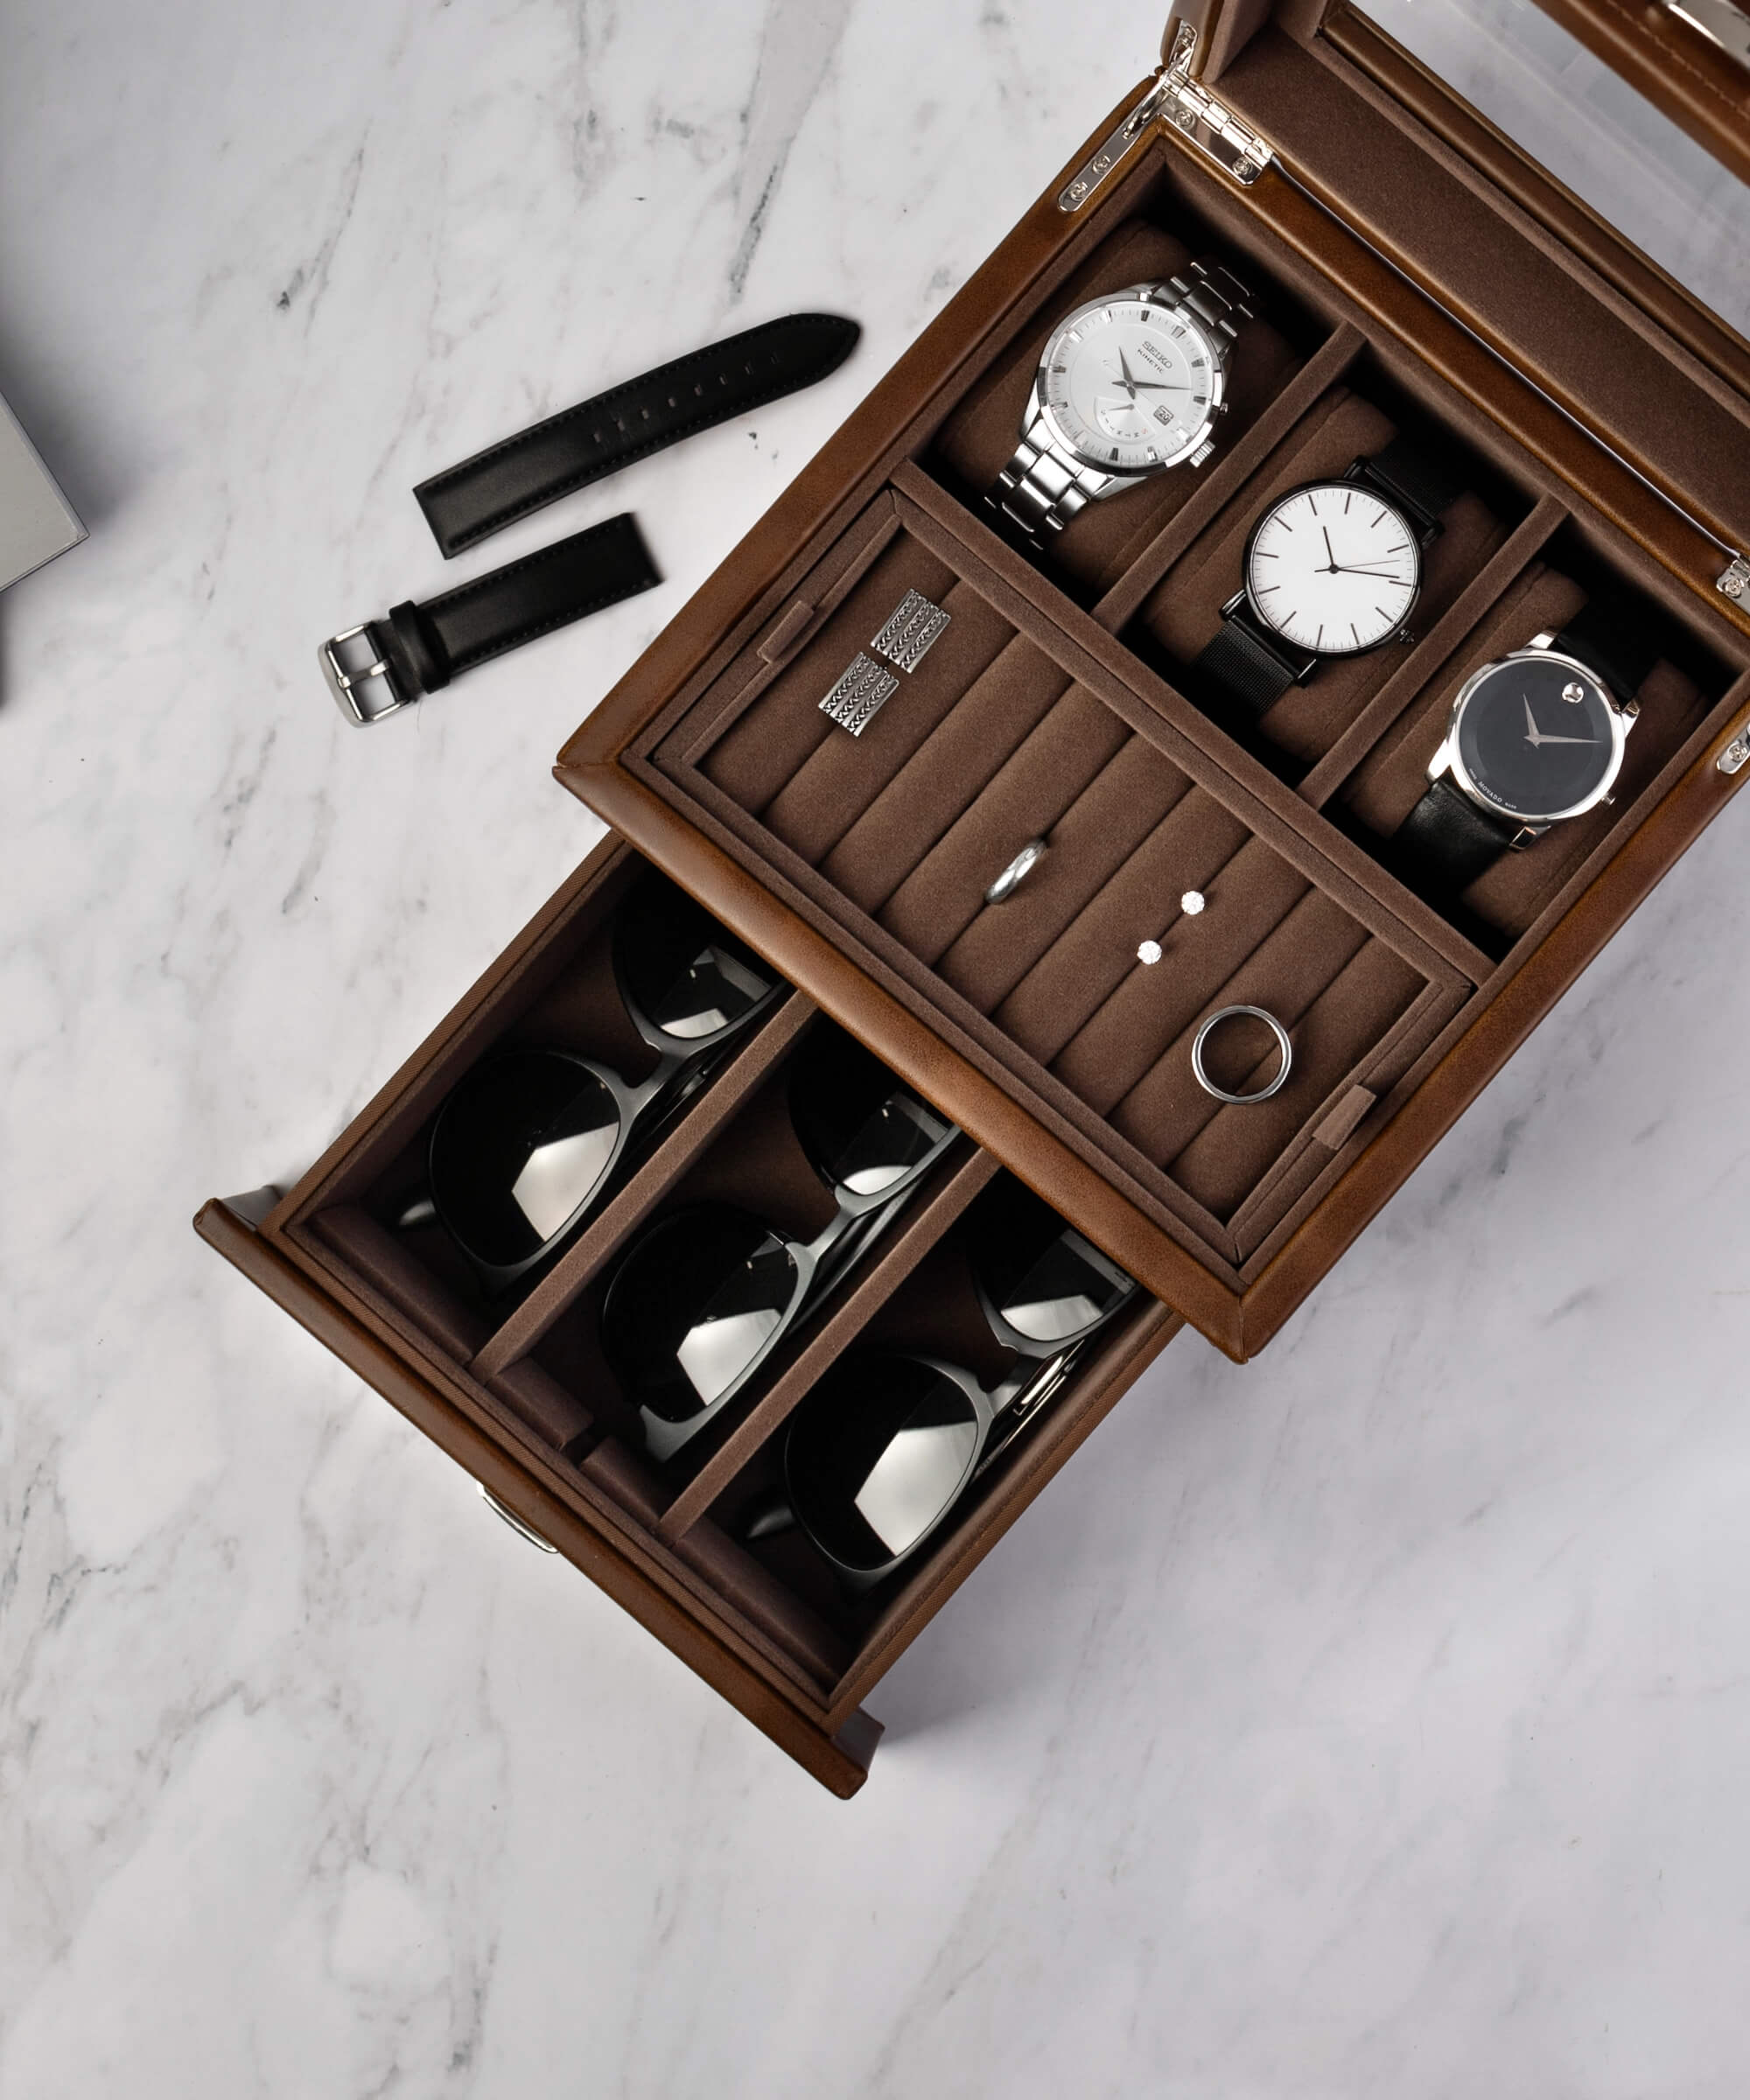 A TAWBURY Bayswater 3 Watch Jewellery Box - Brown with timepieces and lifestyle accessories inside.